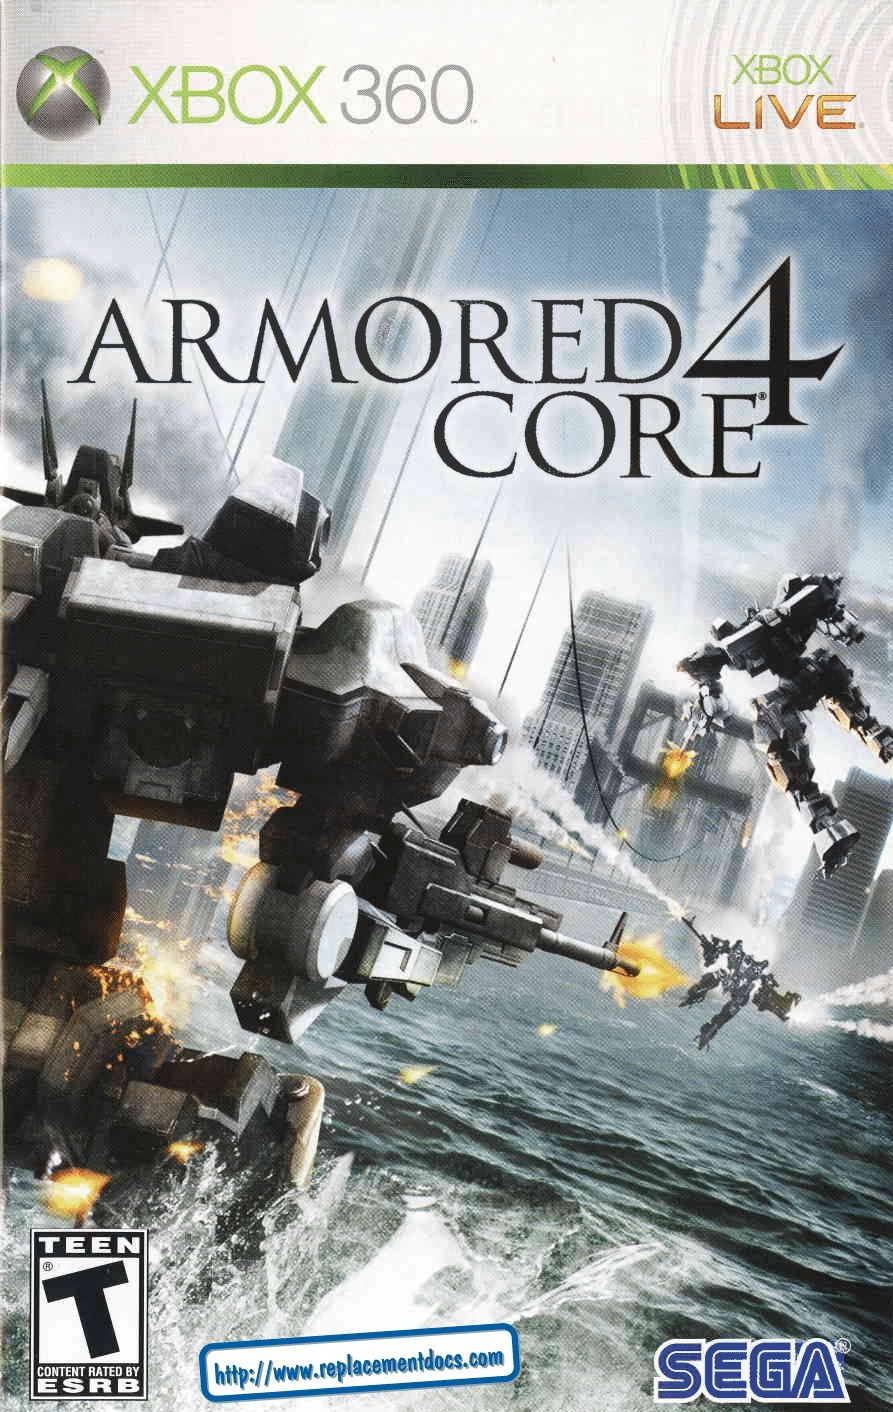 Armored Core 4 (Xbox 360) Game Manual 0